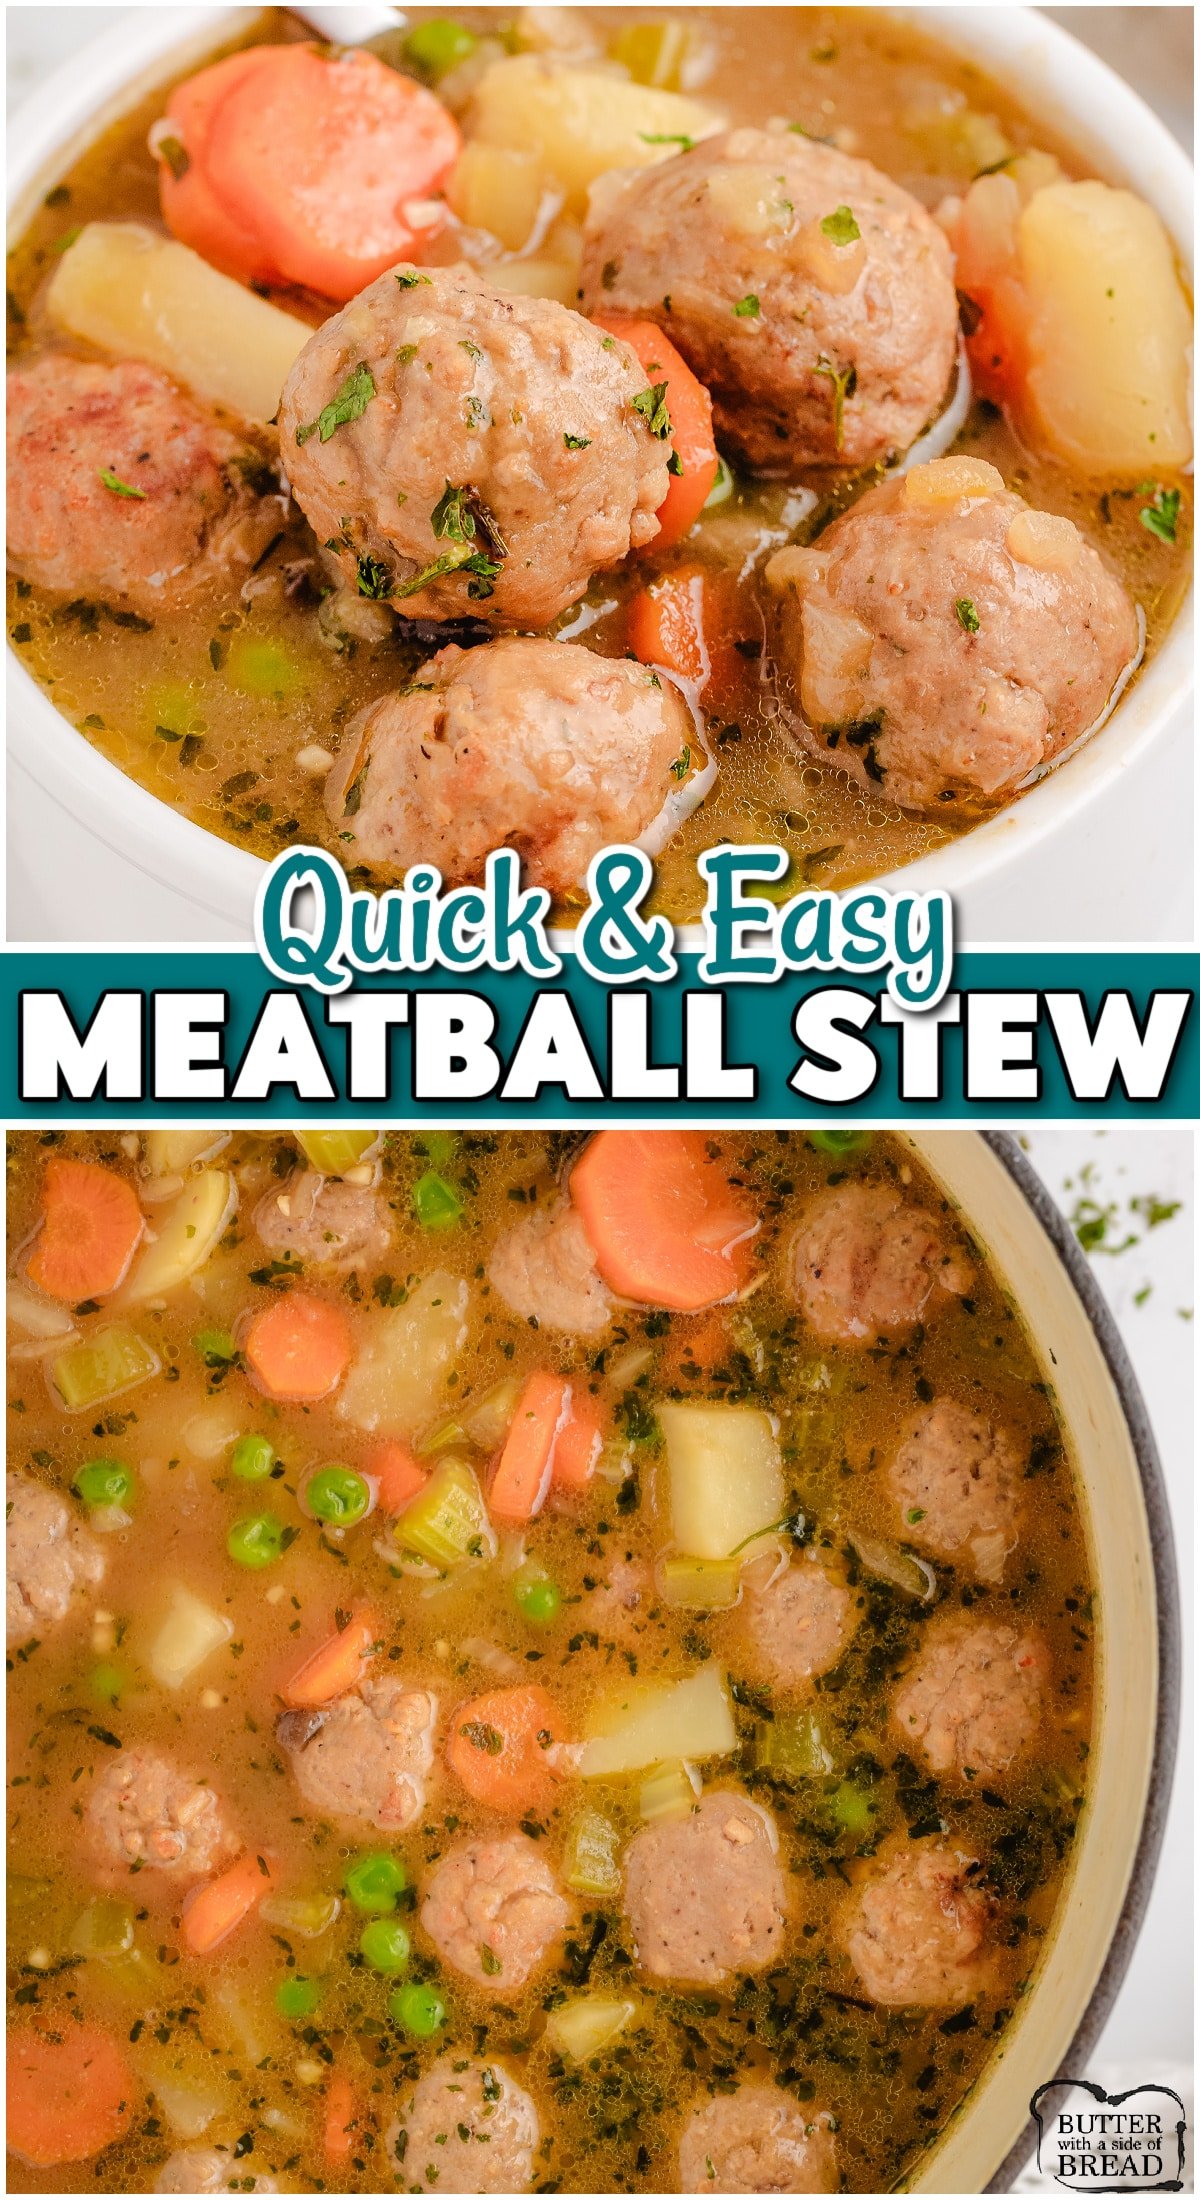 Meatball Stew is a hearty dinner made with pantry & freezer items you likely already have on hand! Flavorful meatballs cooked with veggies in a beef broth base that's simple to make & tastes delicious!